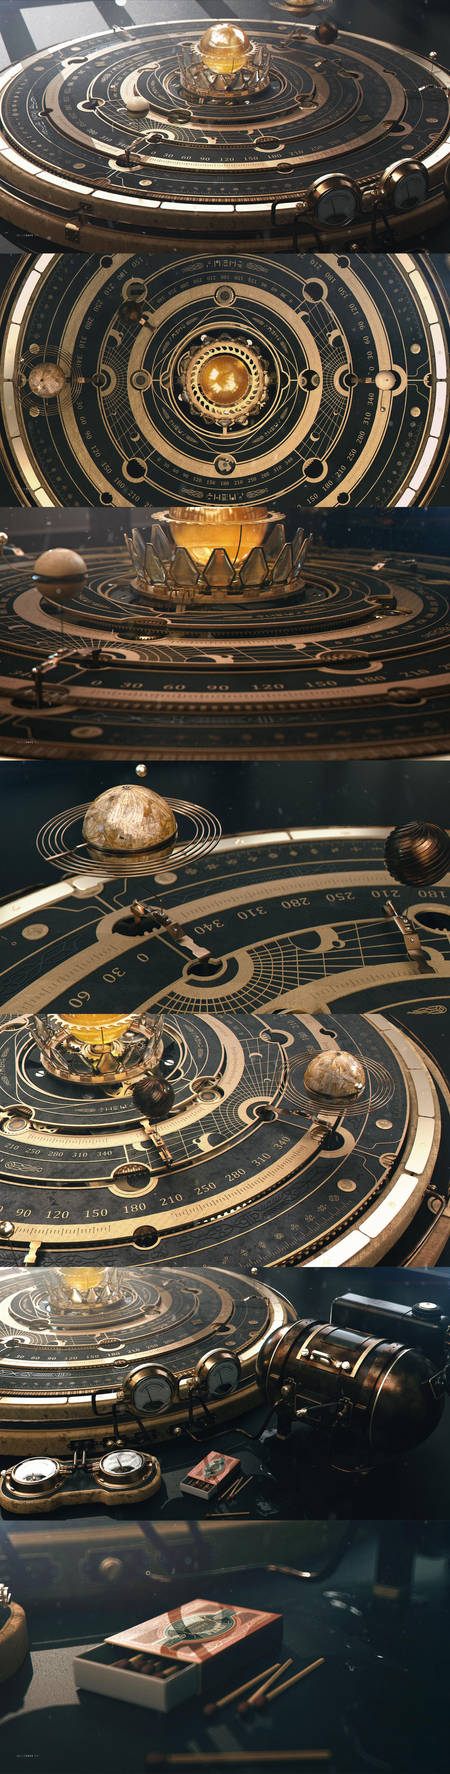 Steampunk Astrolabe Orrery Table